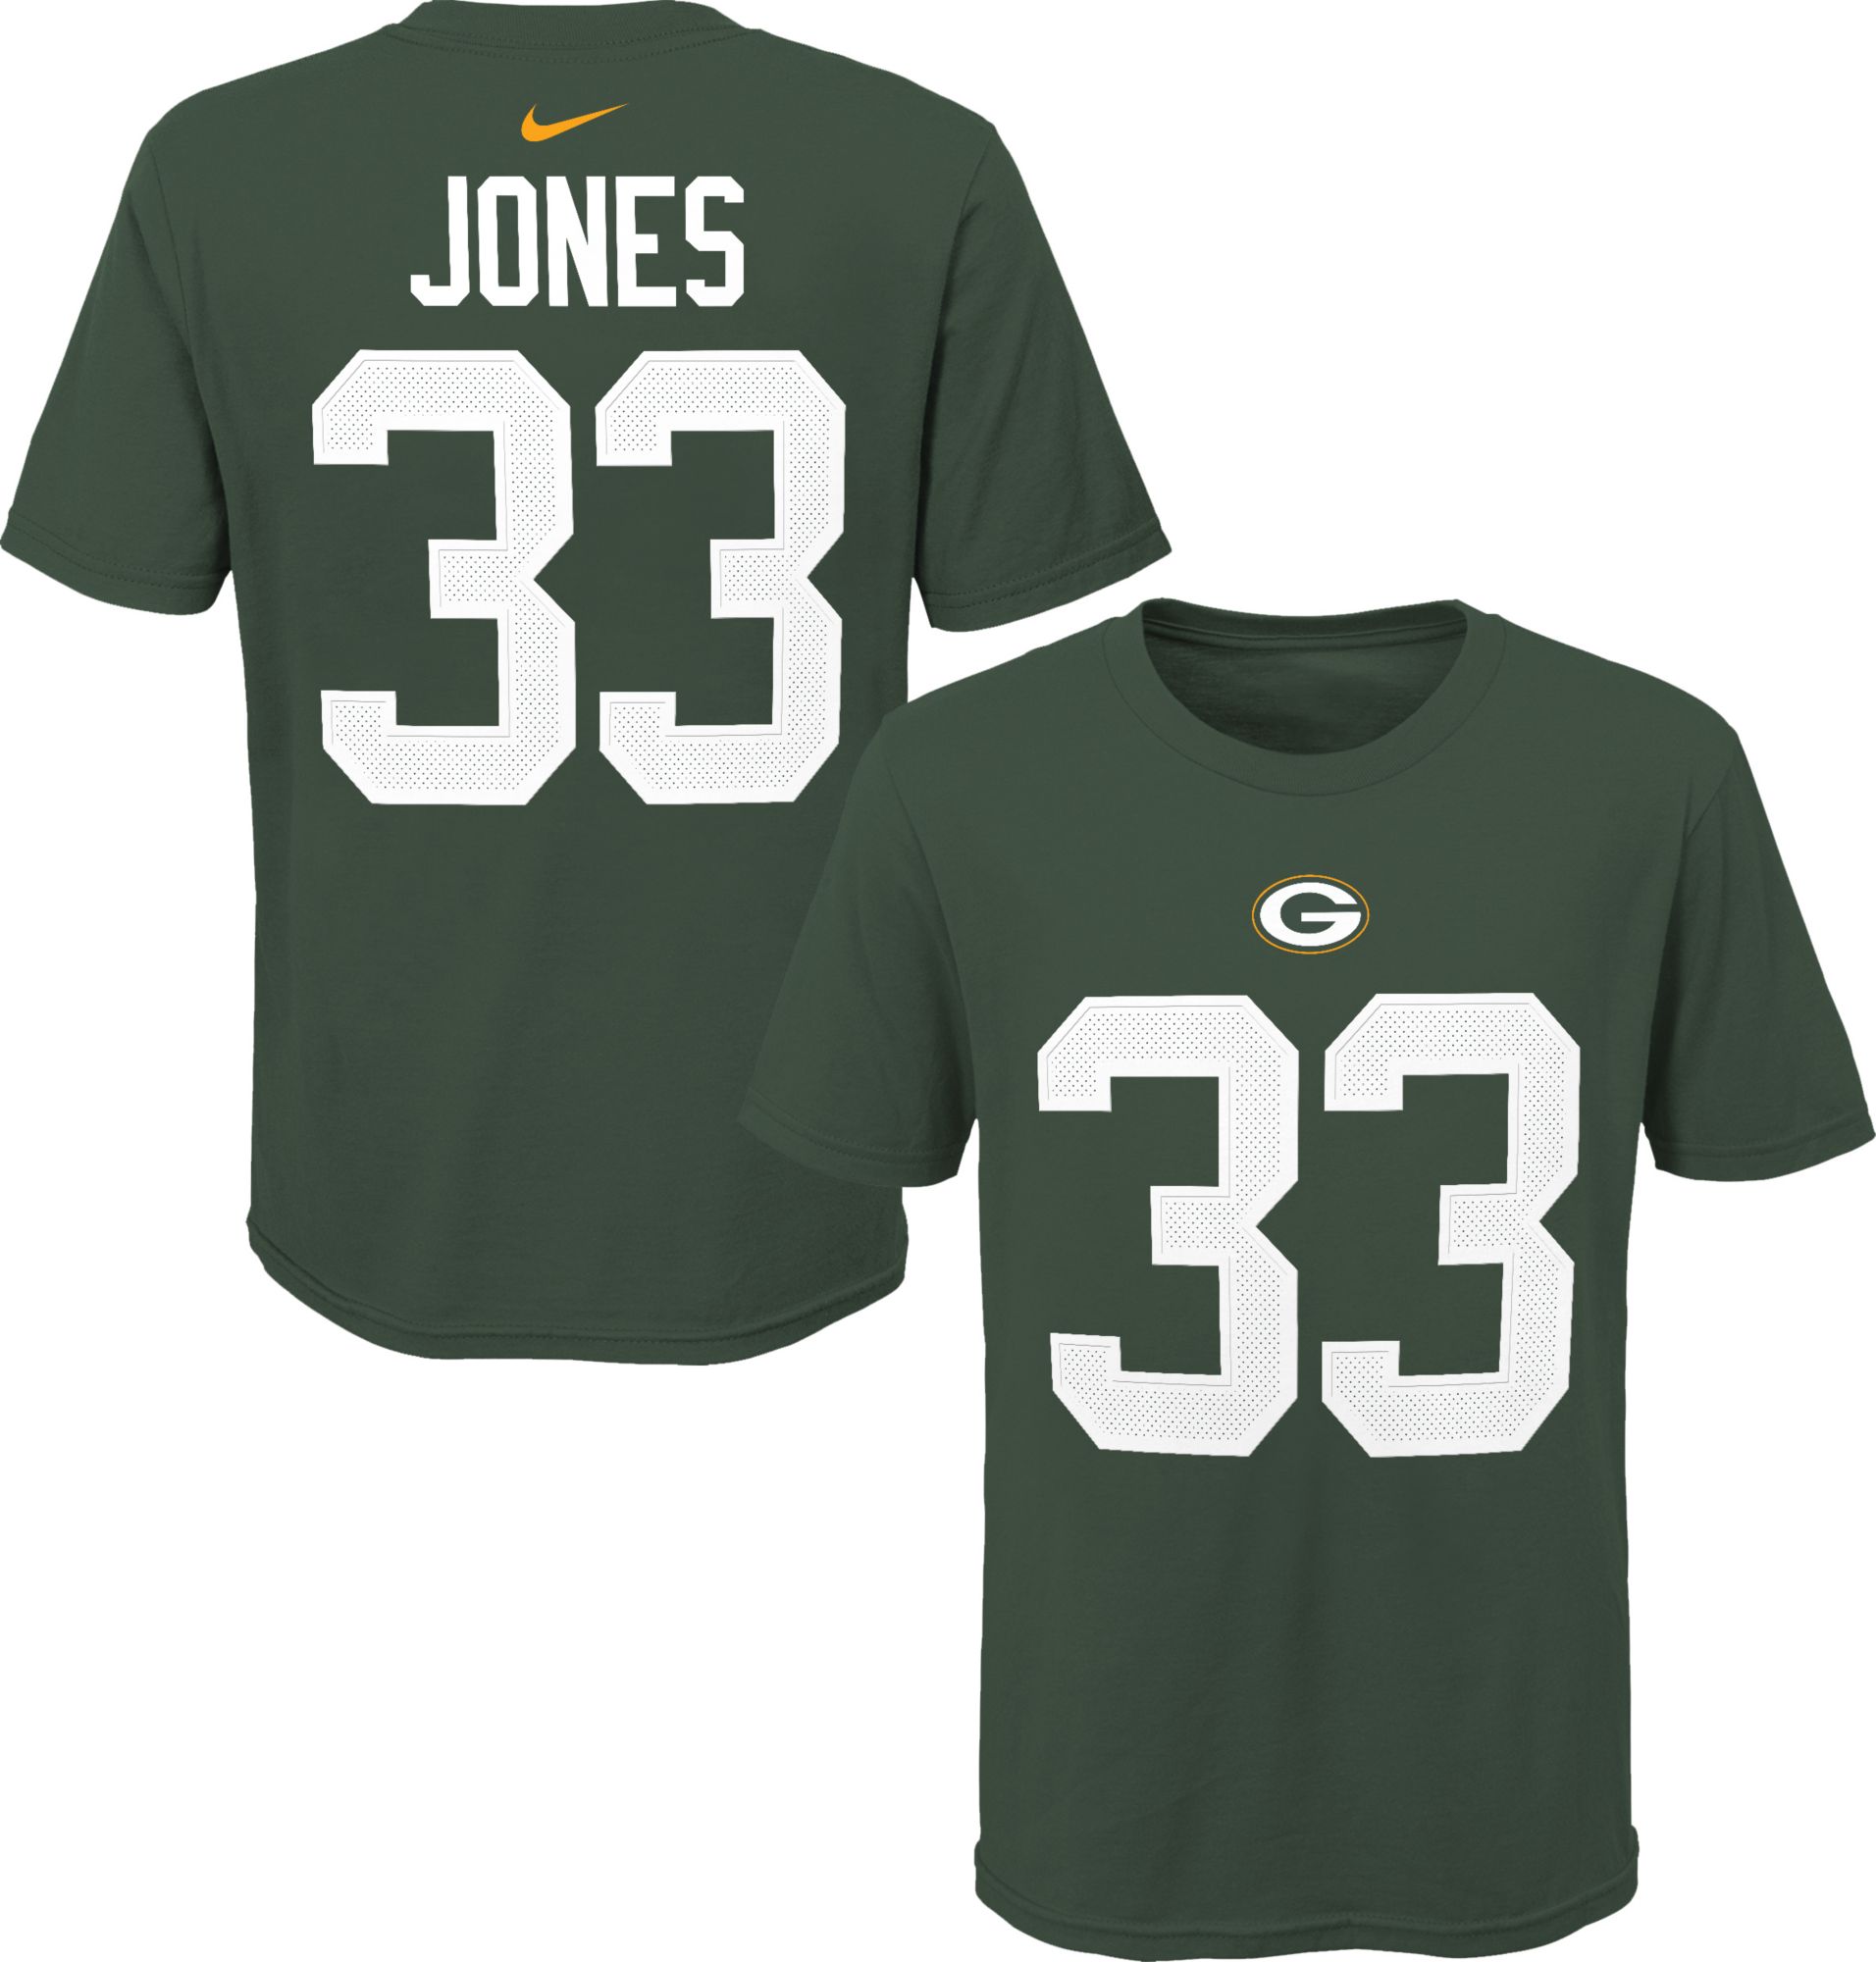 Green Bay Packers apparel